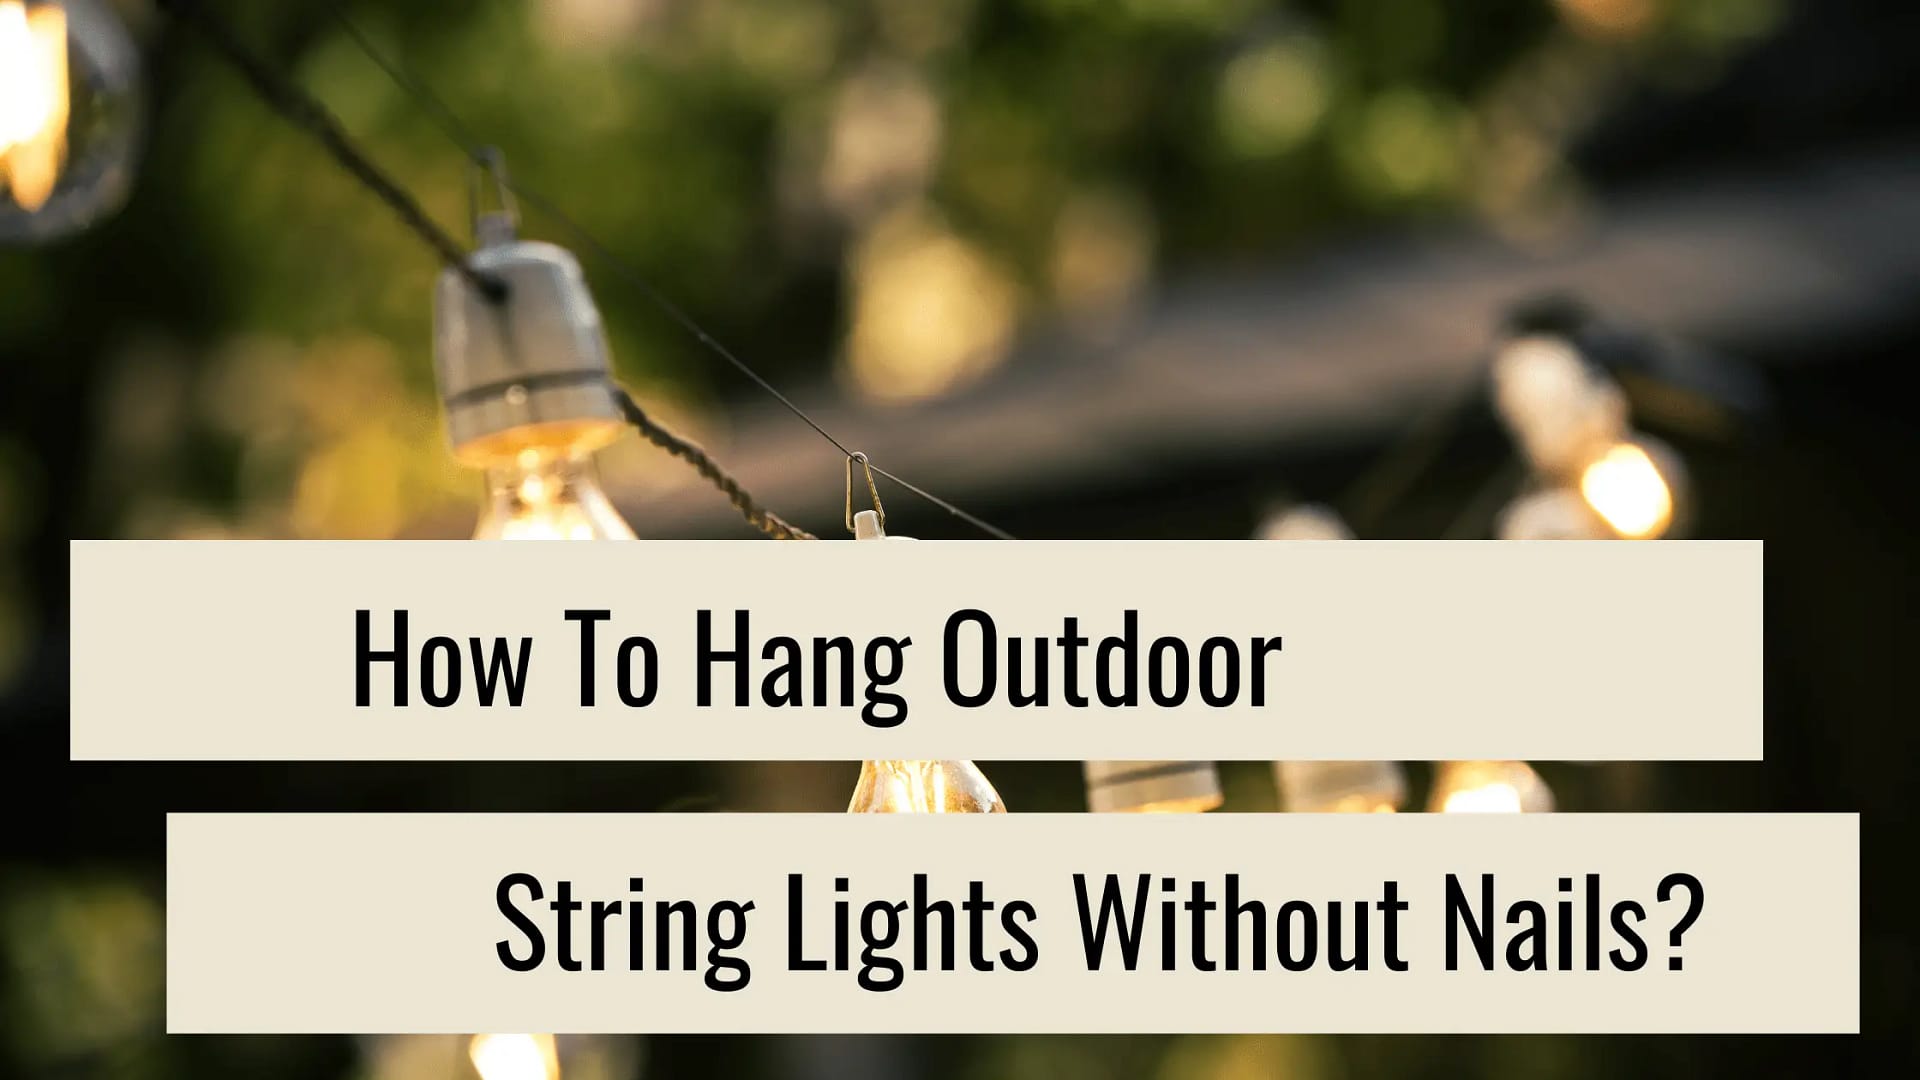 How To Hang Outdoor String Lights Without Nails?